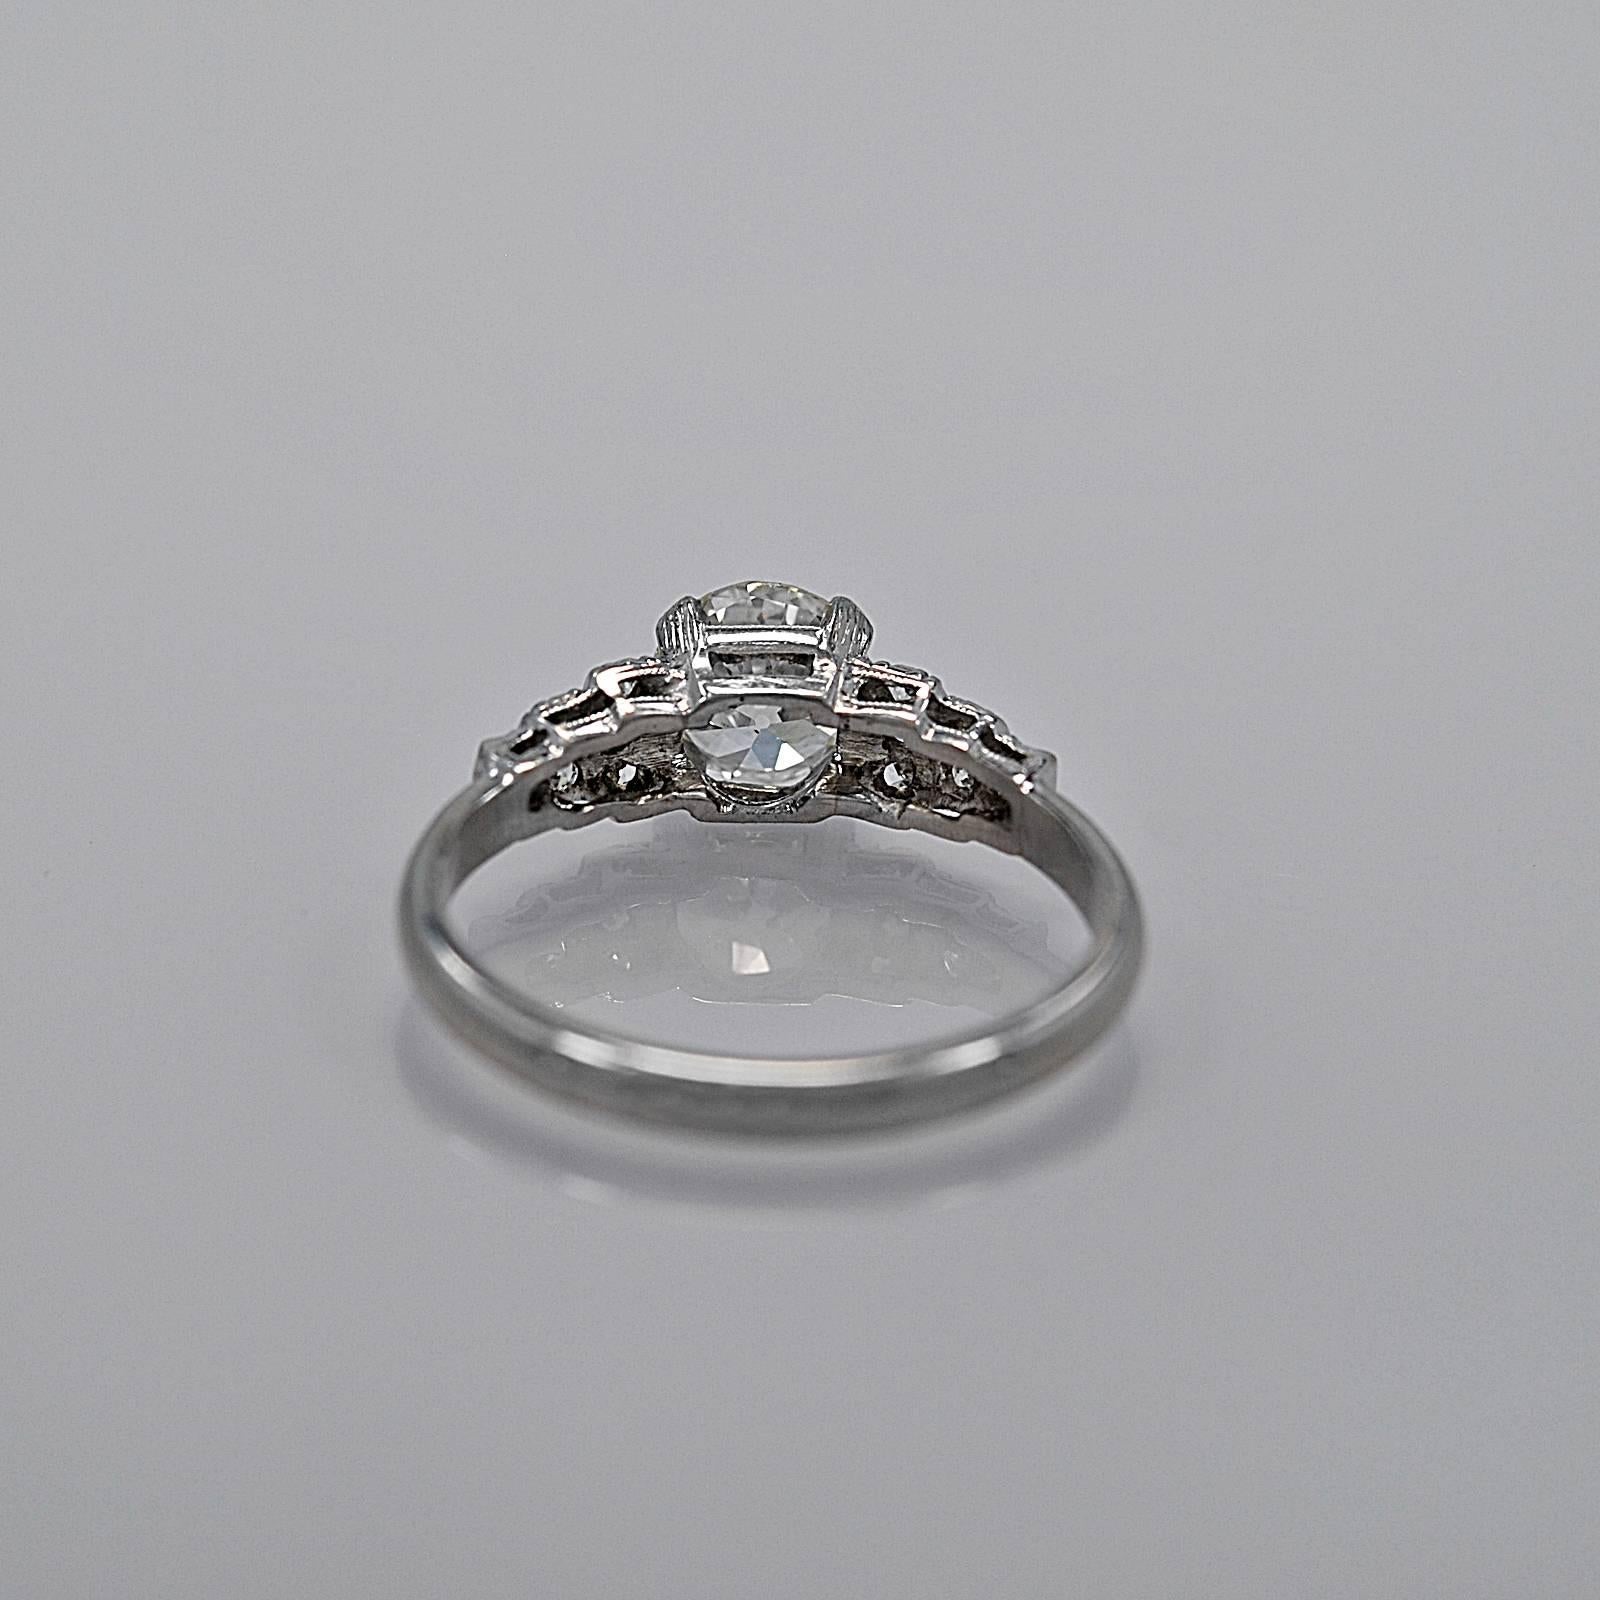 In our Tampa store this has a retail price of $9,995.

An original platinum Art Deco diamond engagement ring featuring a .96ct. apx. European cut center diamond with SI1 clarity and I color. There are diamond melee set on each side of the center